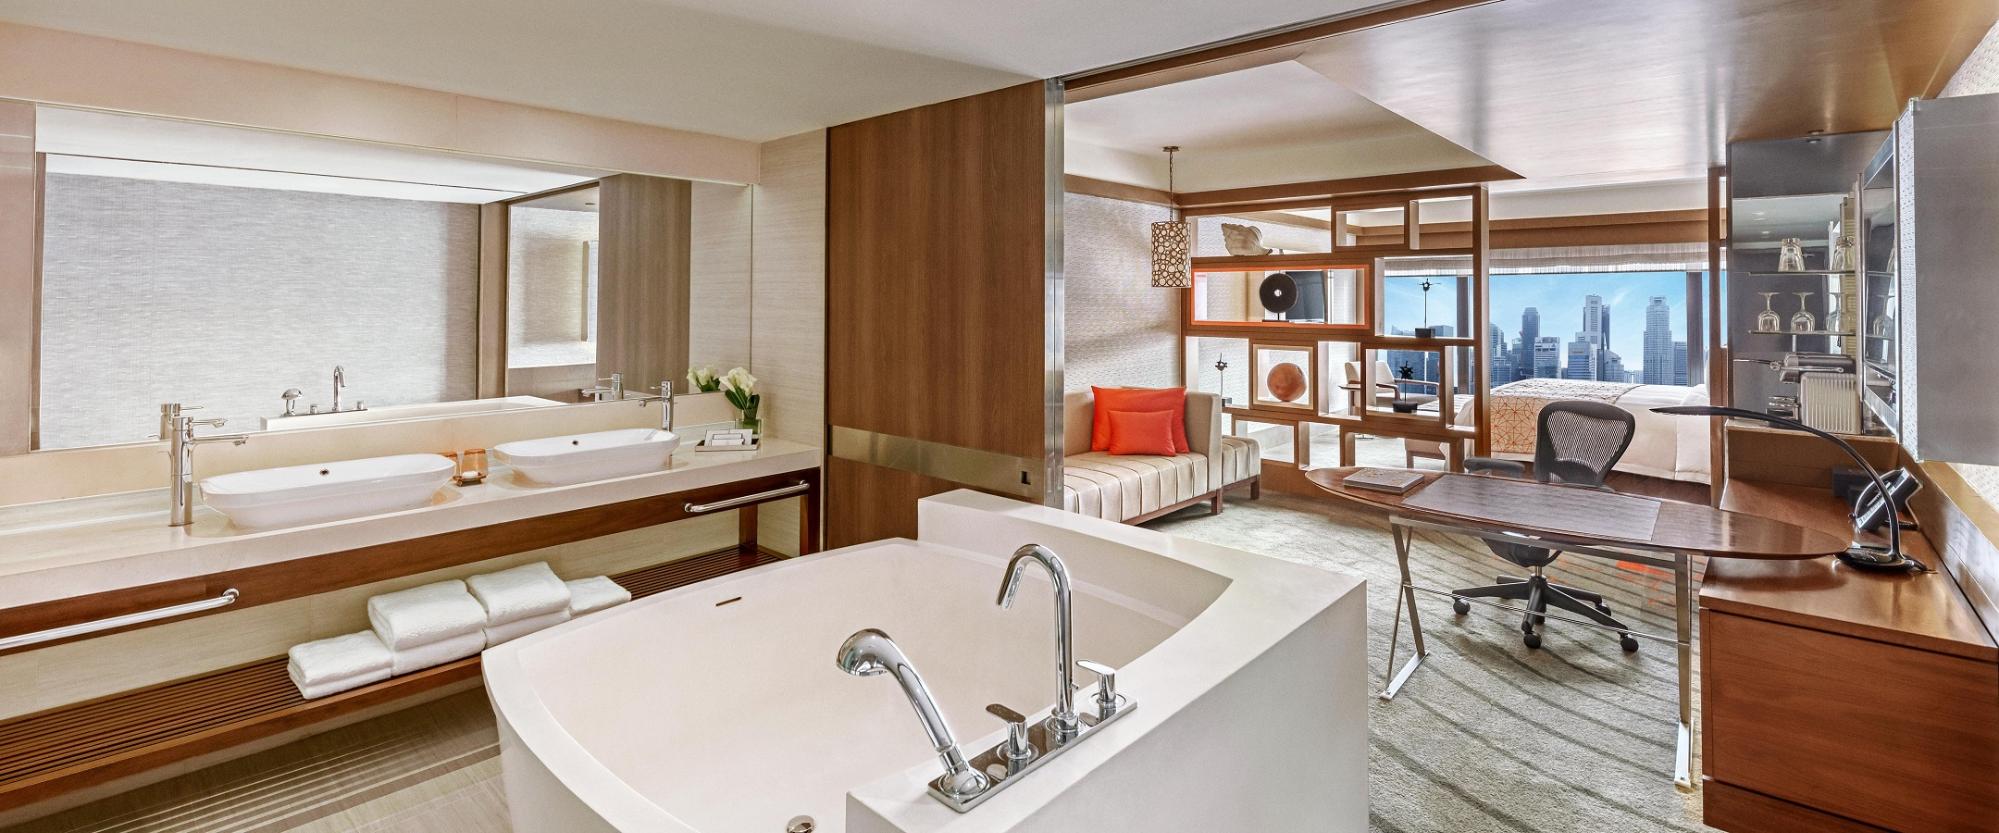 hotels with bathtubs - Pan Pacific Hotel